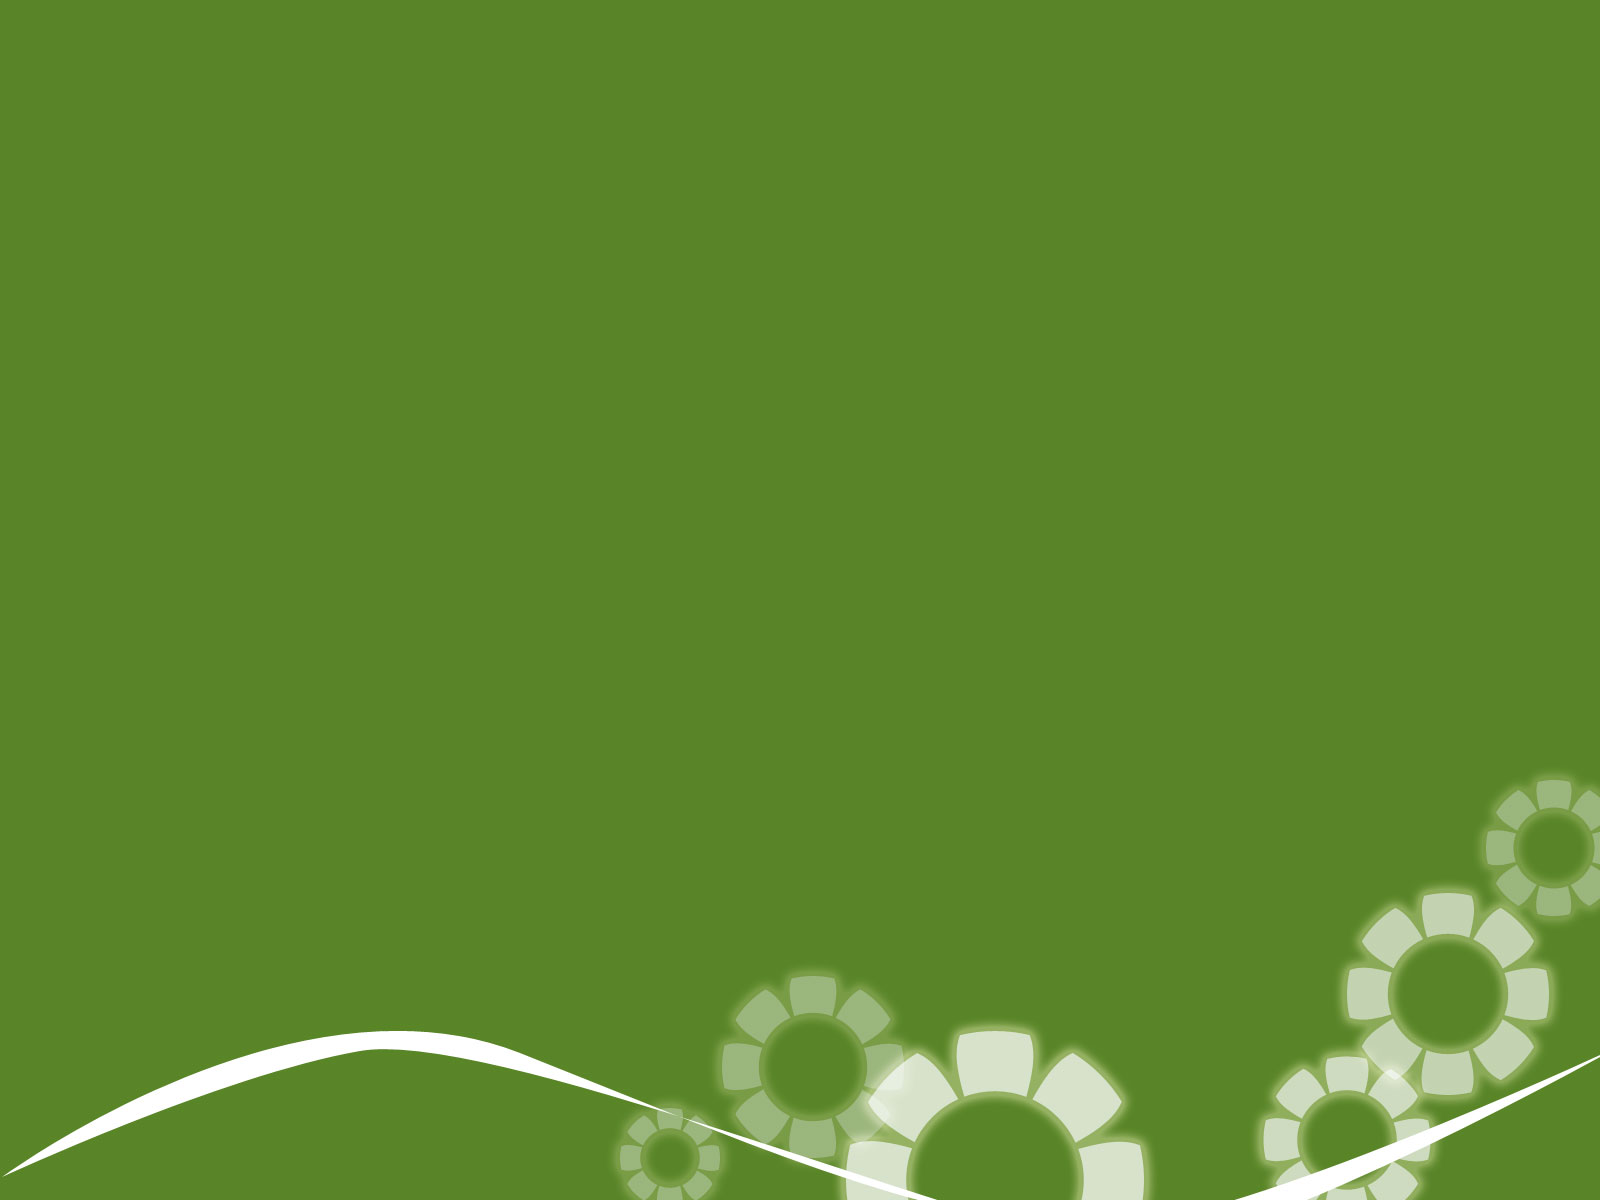 Gears Green backgrounds